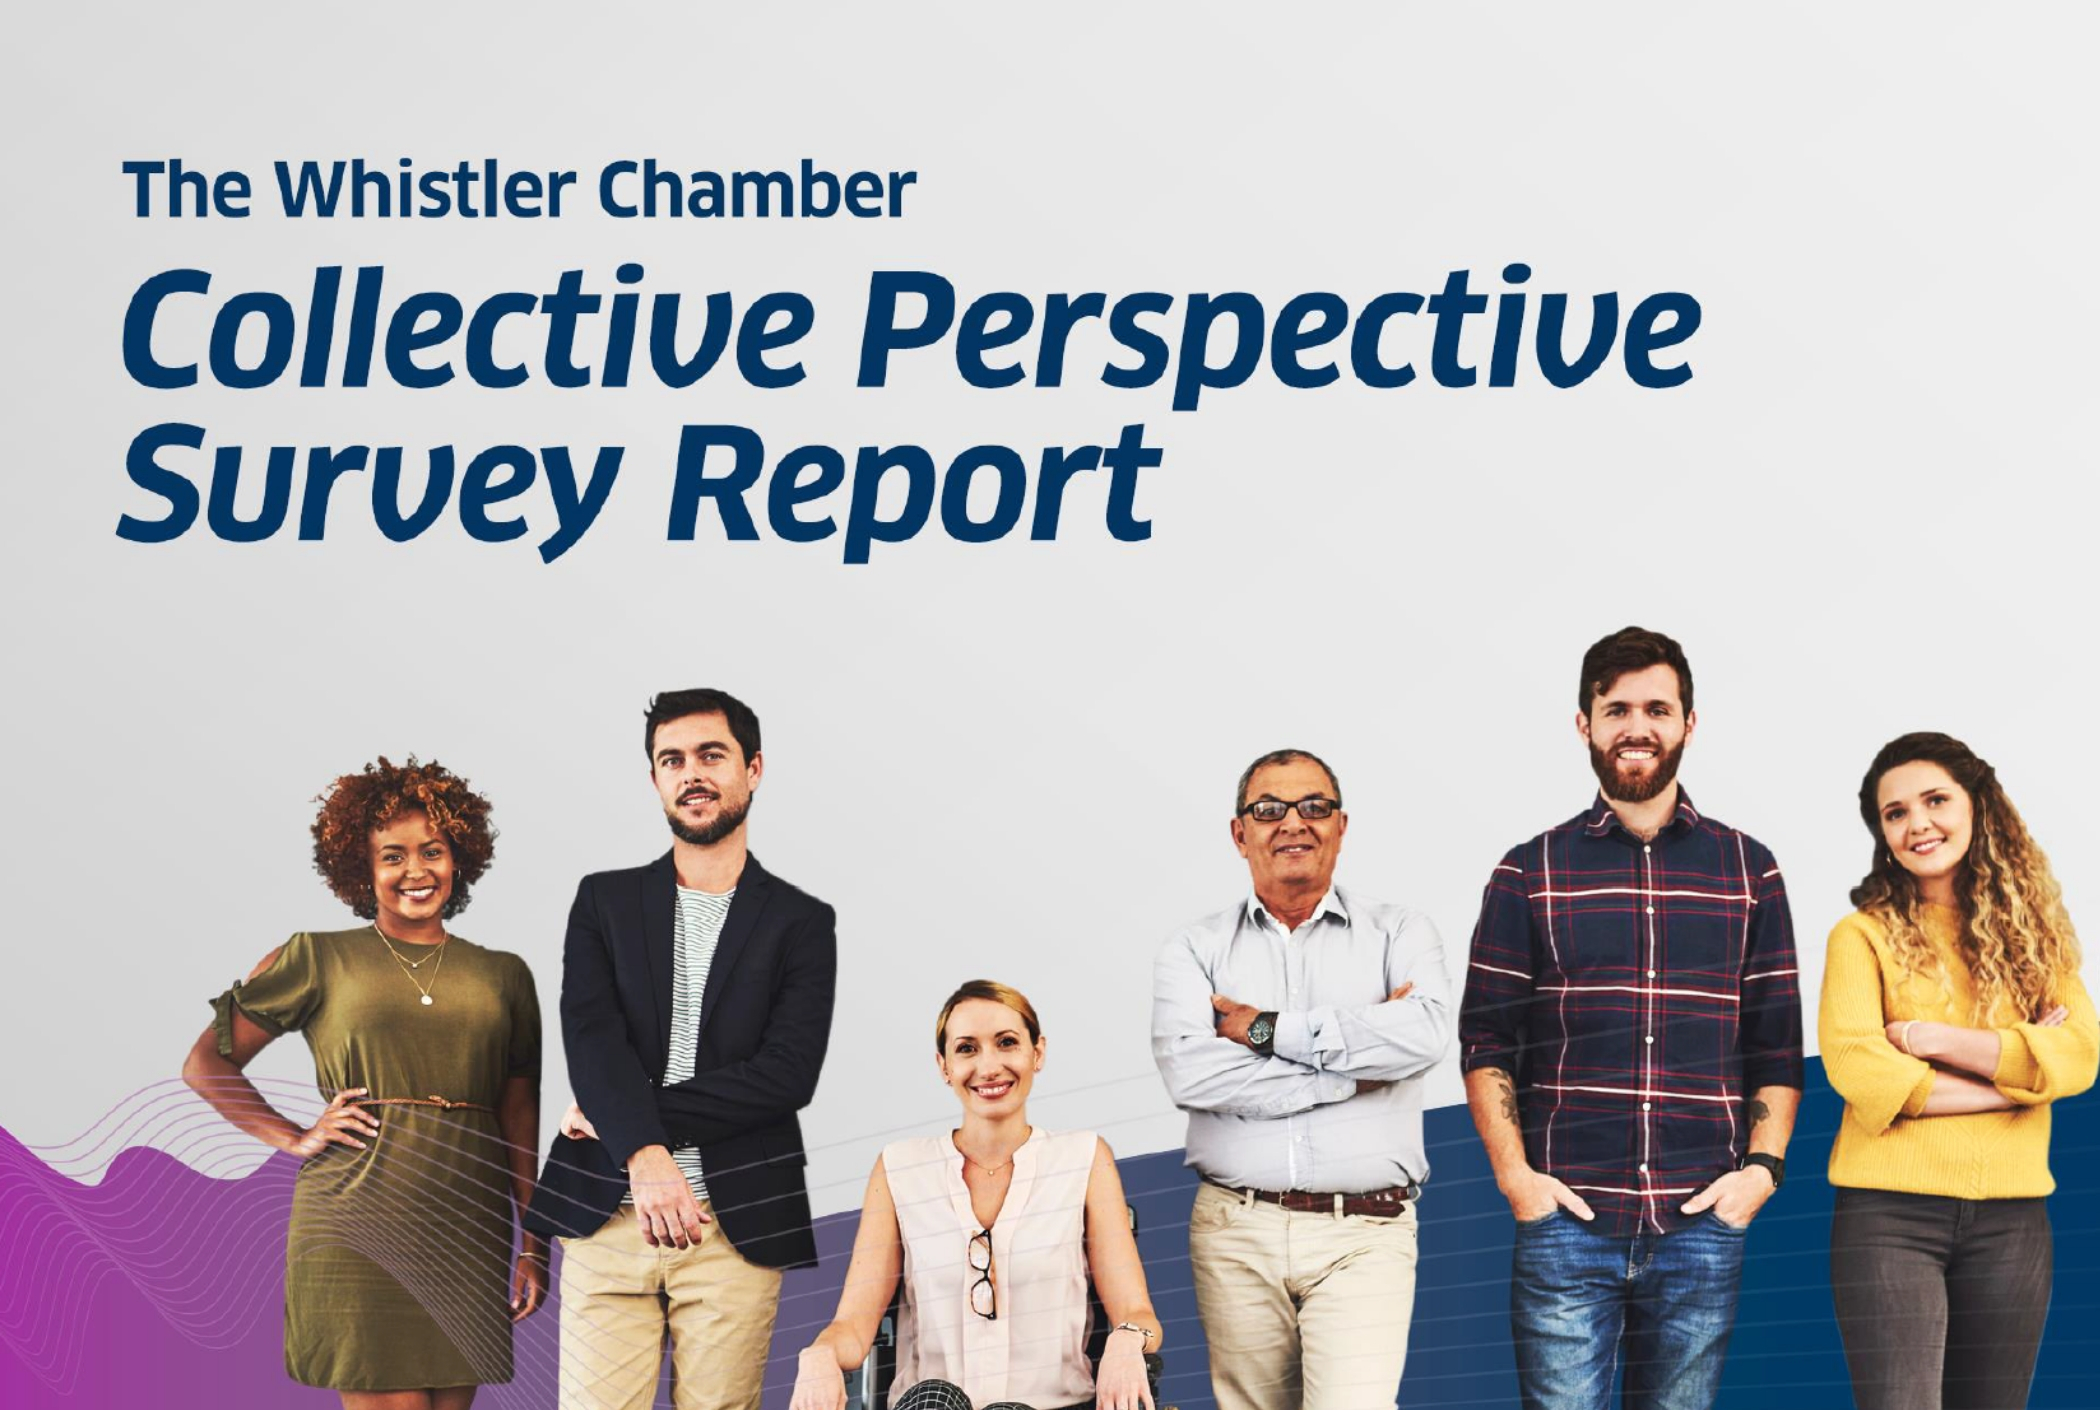 2019/20 Collective Perspective Survey Report